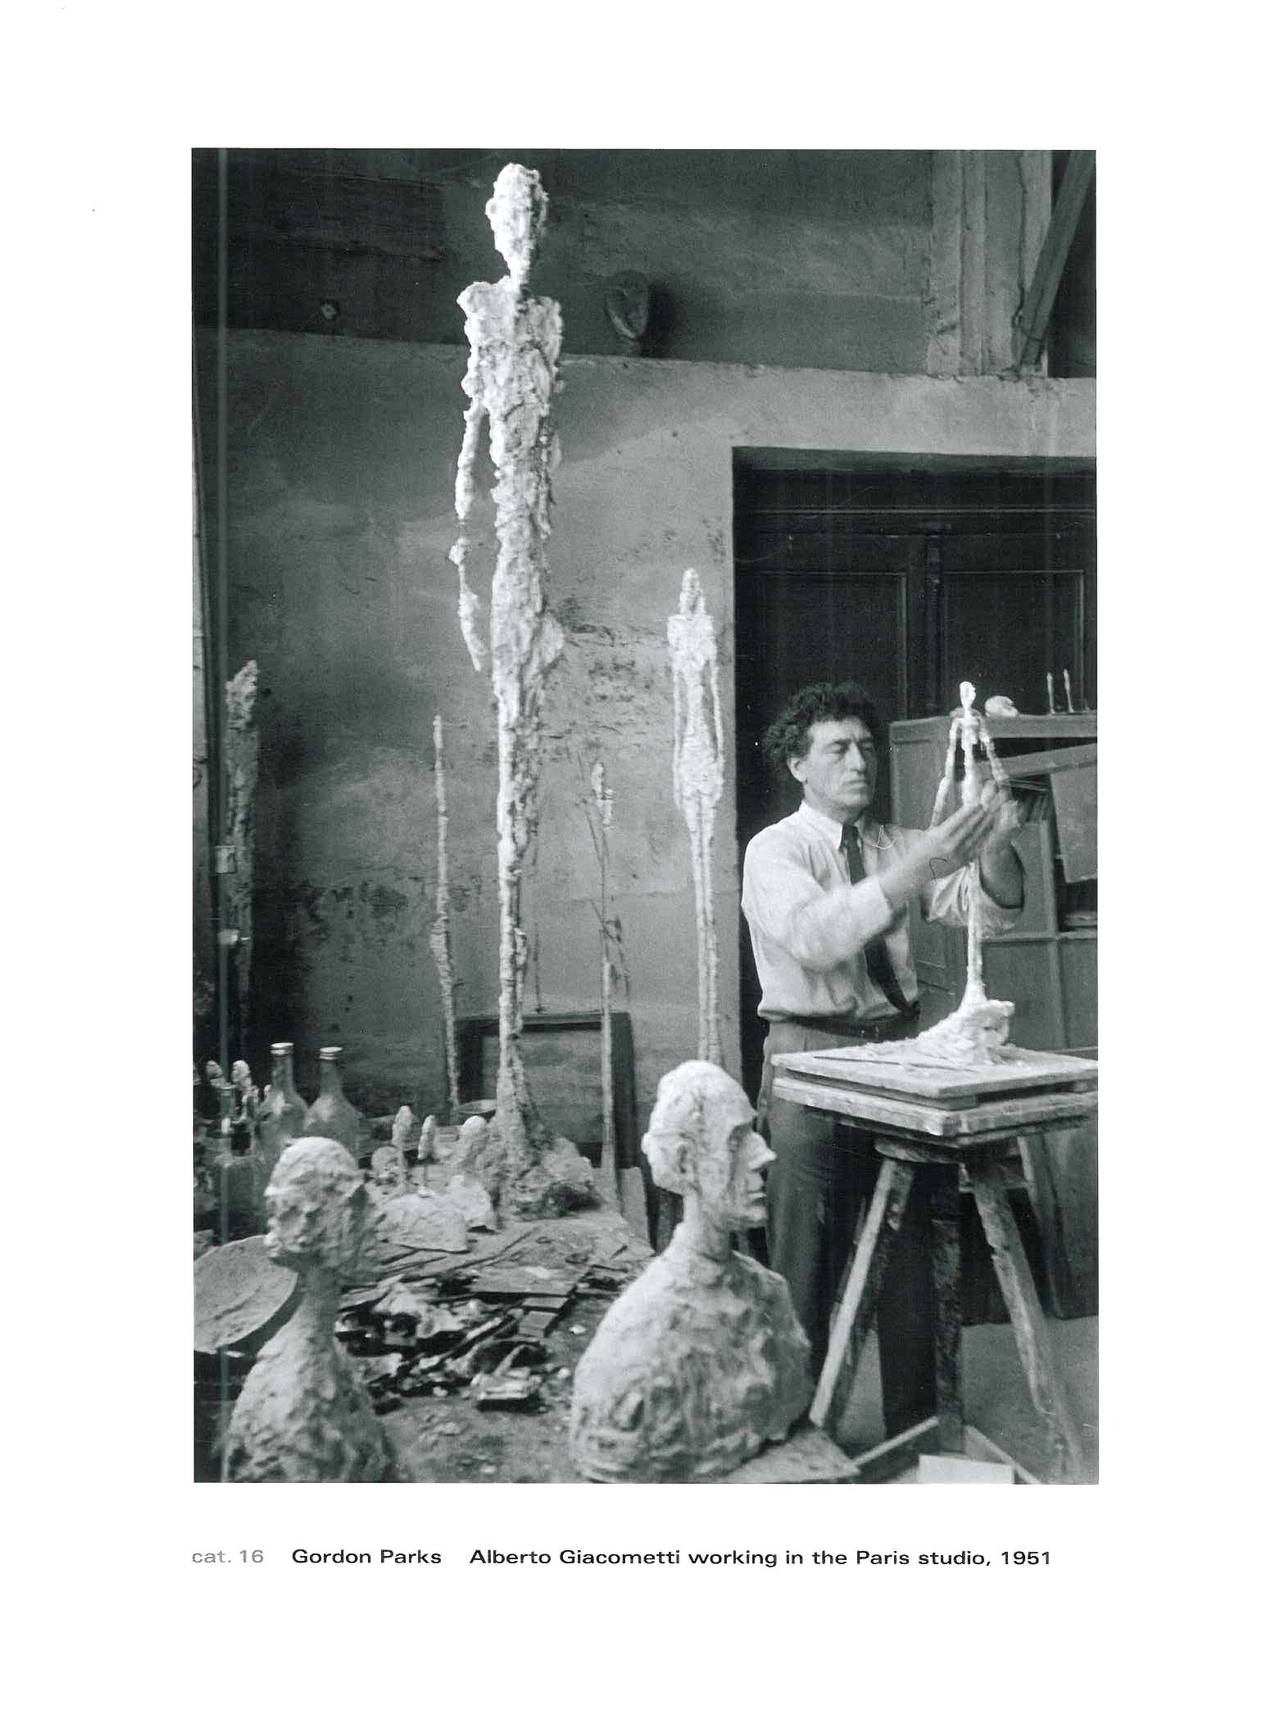 Hardback book with dust jacket published in 2011 to accompany an exhibition which features these unknown photographs and drawings of the life and works of Alberto Giacometti. A collection of wonderful black & white photographs of the artist and some